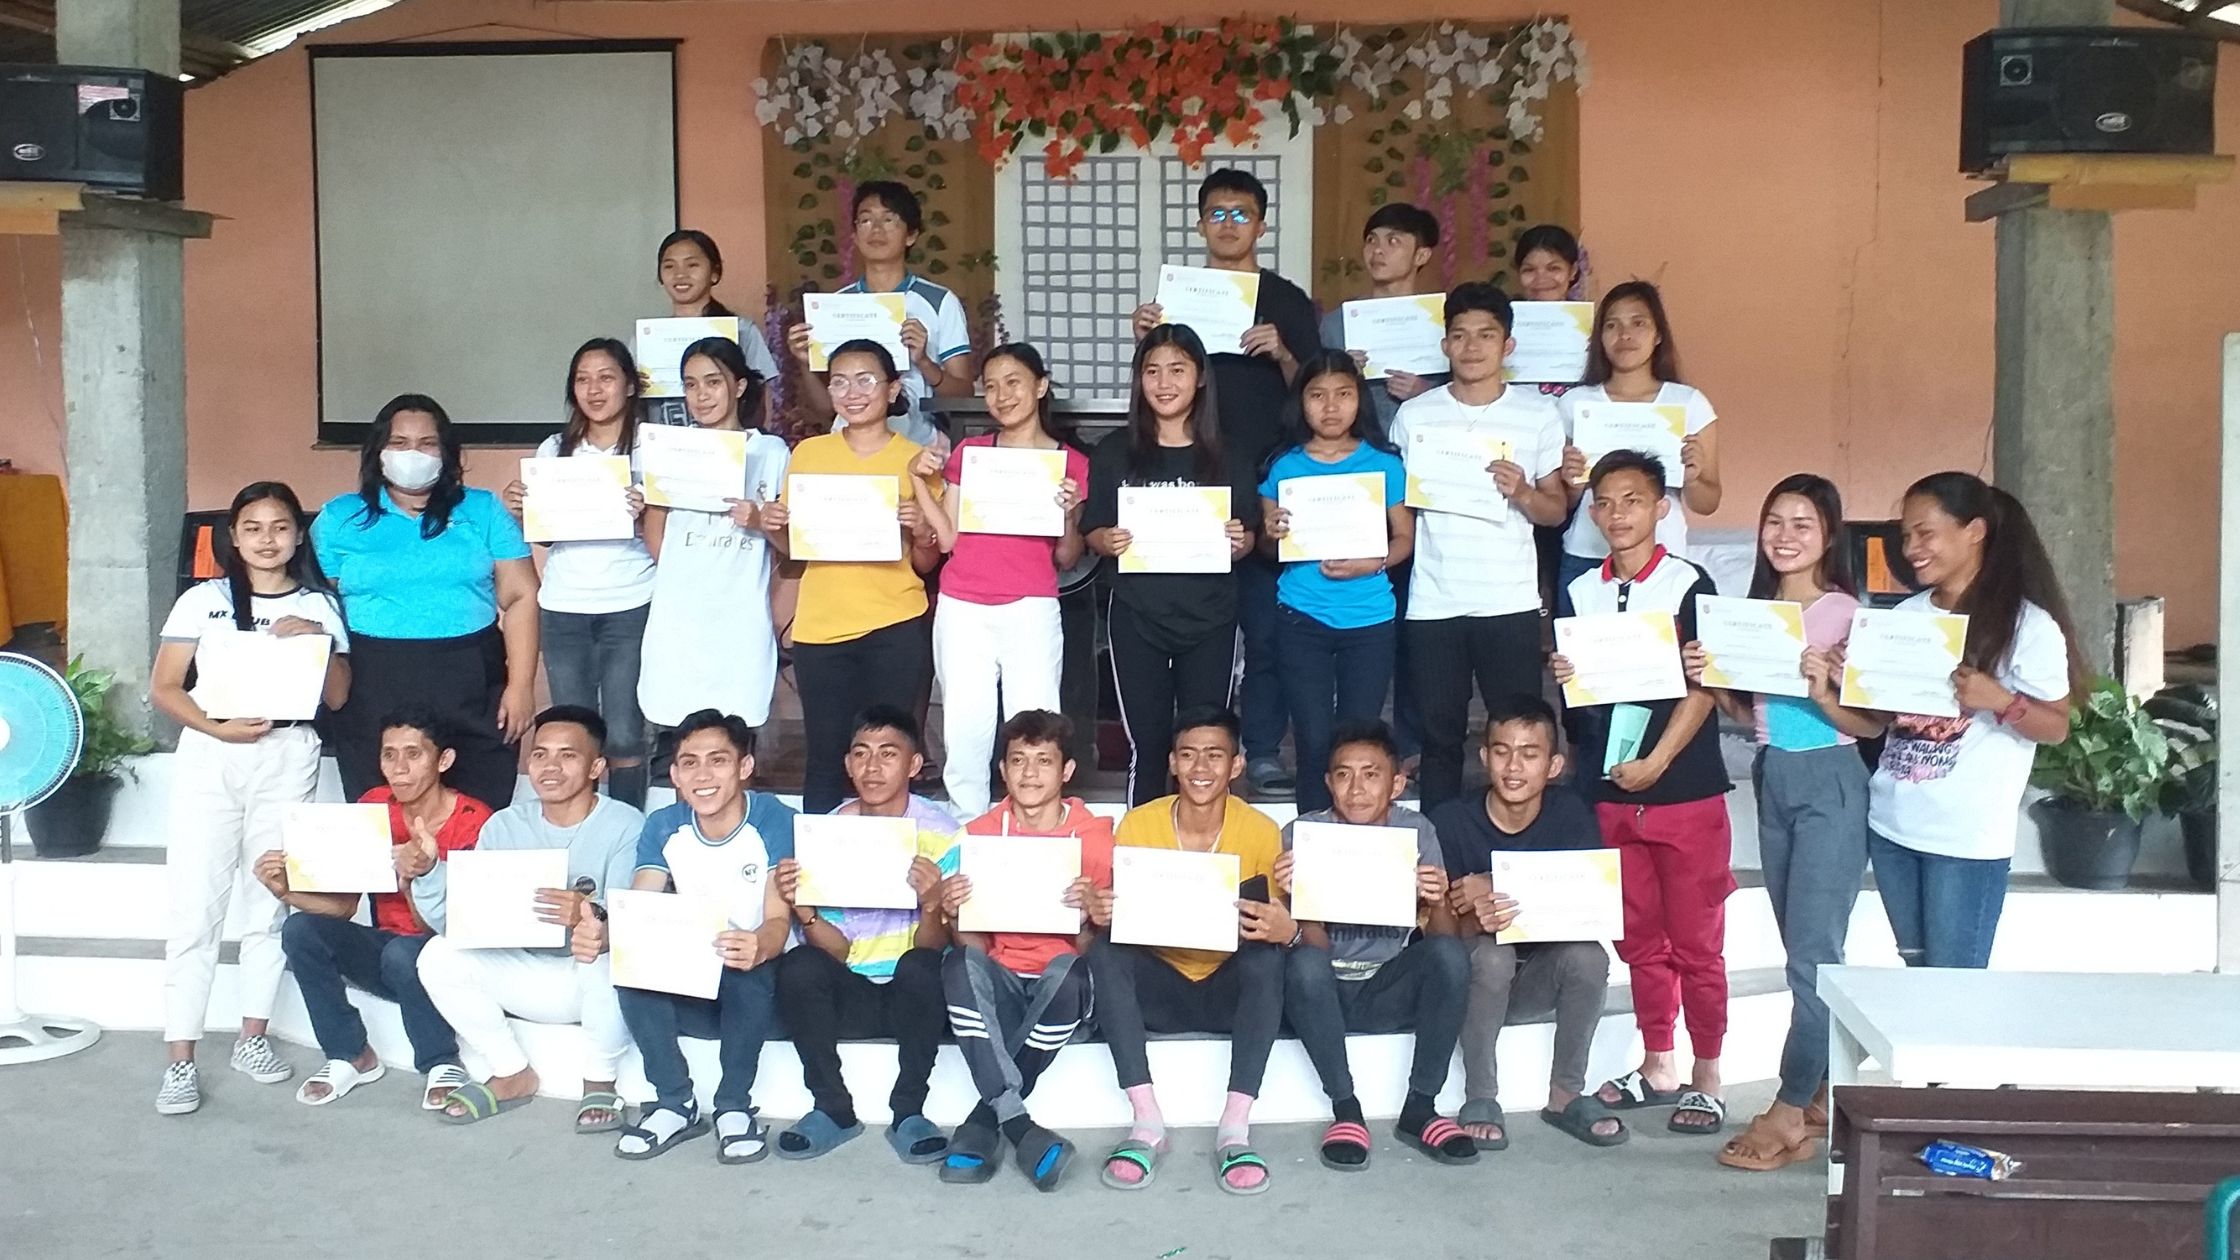 Students holding up their degree at the Community School Partnership in the Phillipines